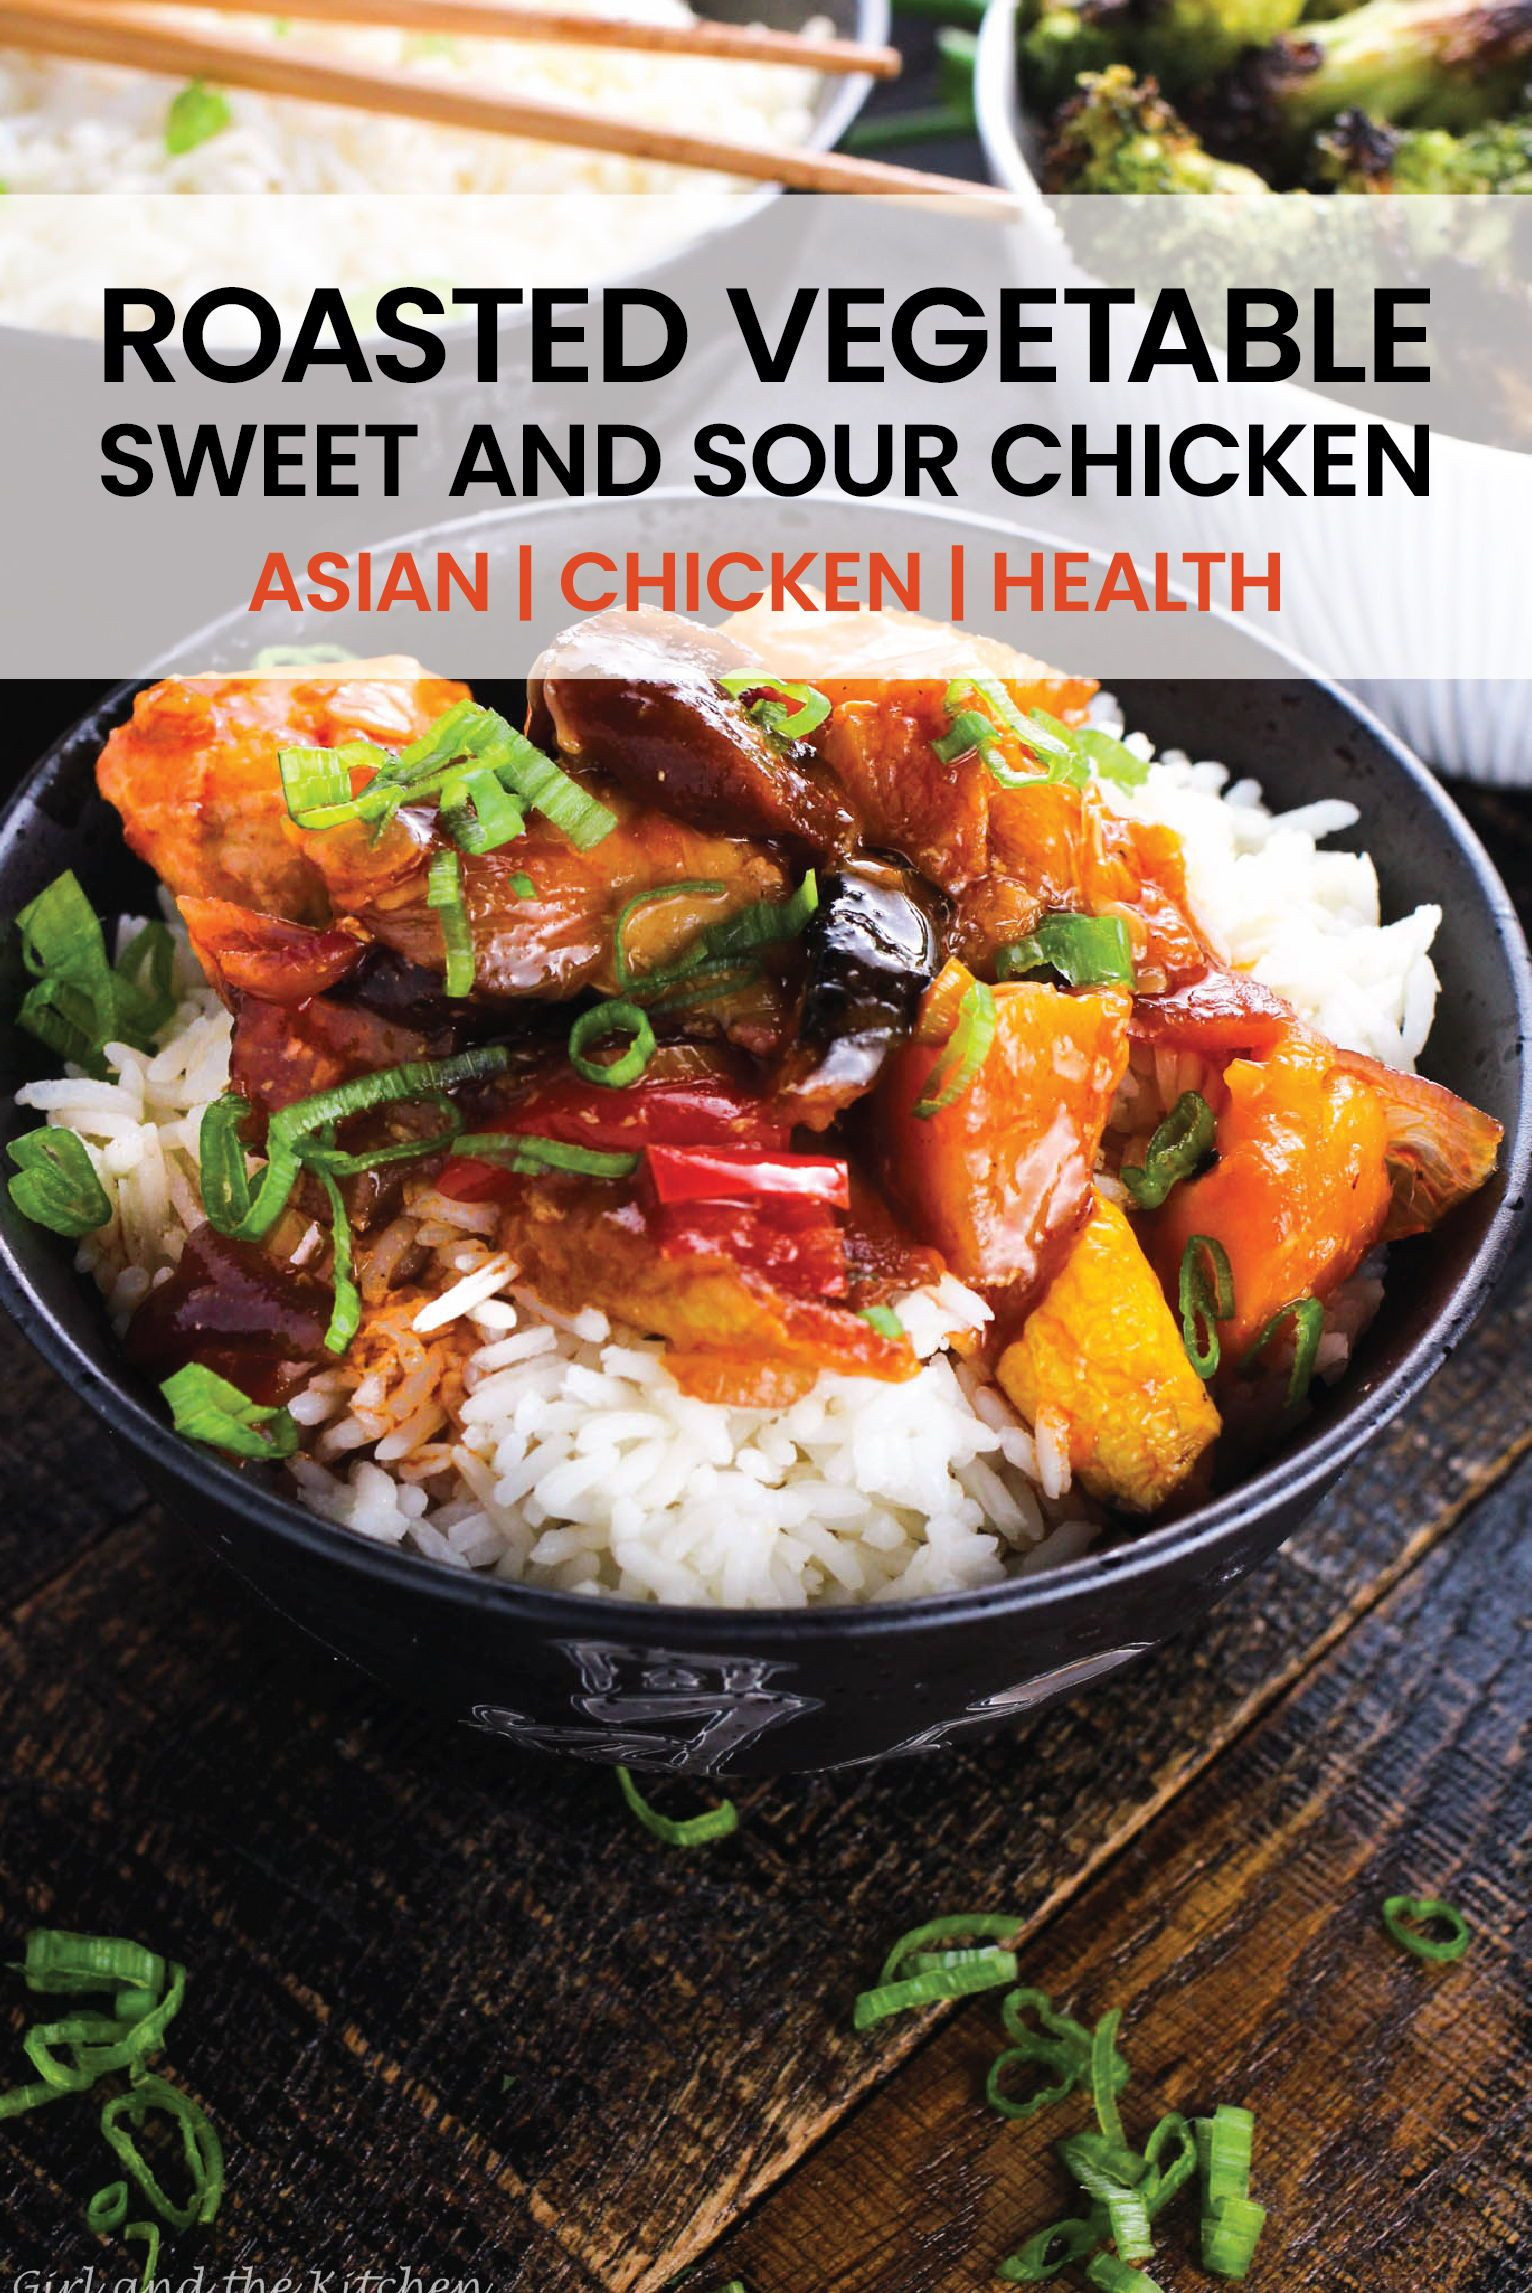 Recipes Using Baby Food Meat
 Roasted Ve able Sweet and Sour Chicken with Ginger